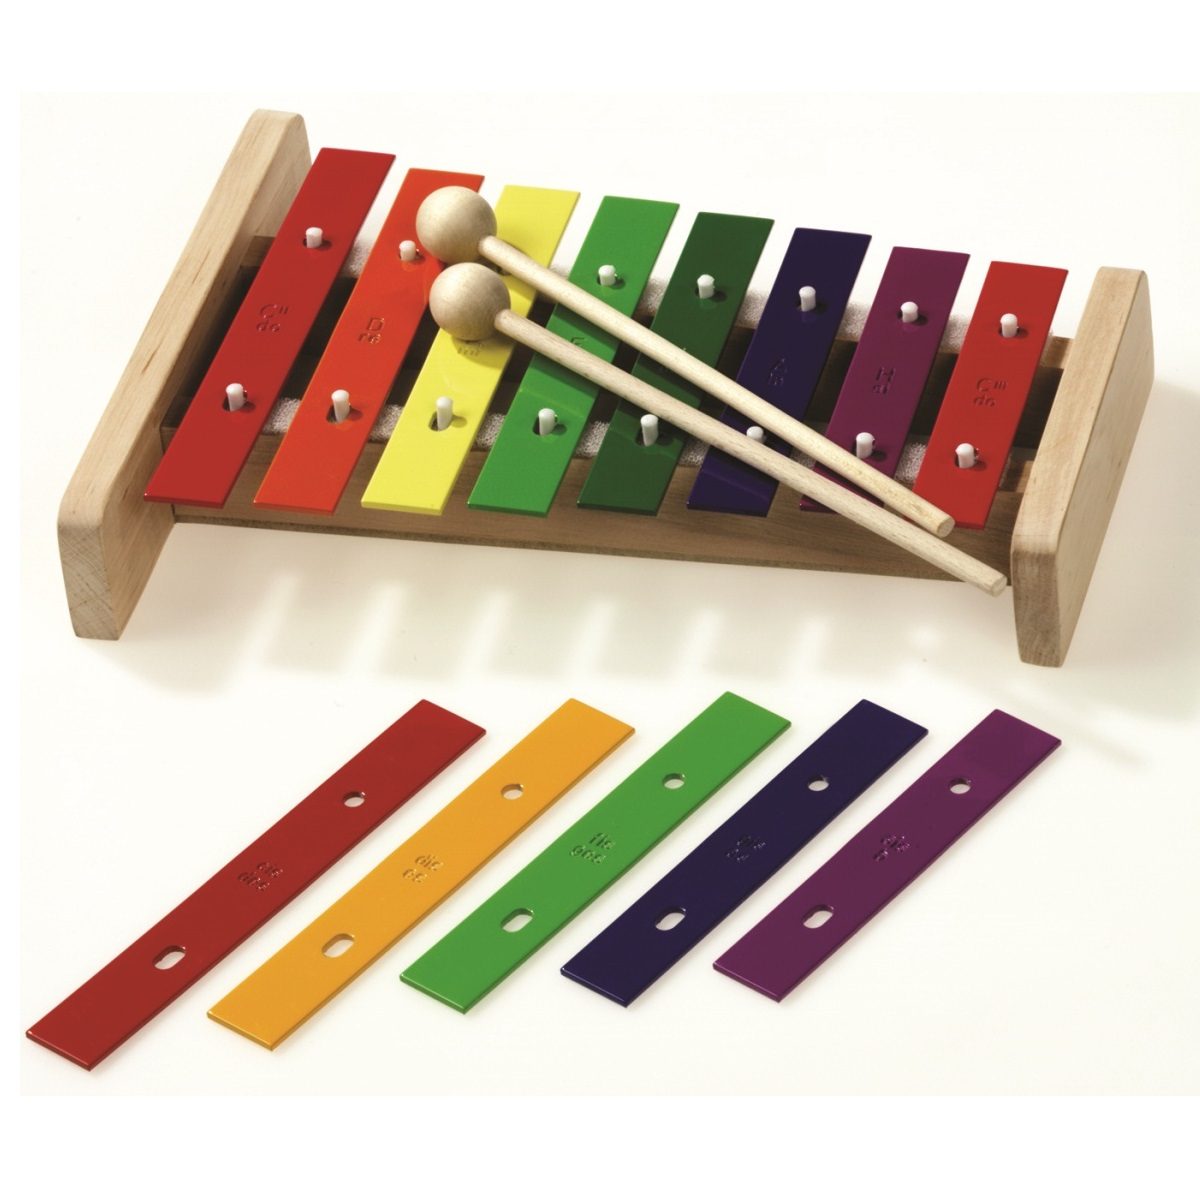 Xylophone from the Knowledge Research | www.why.gr